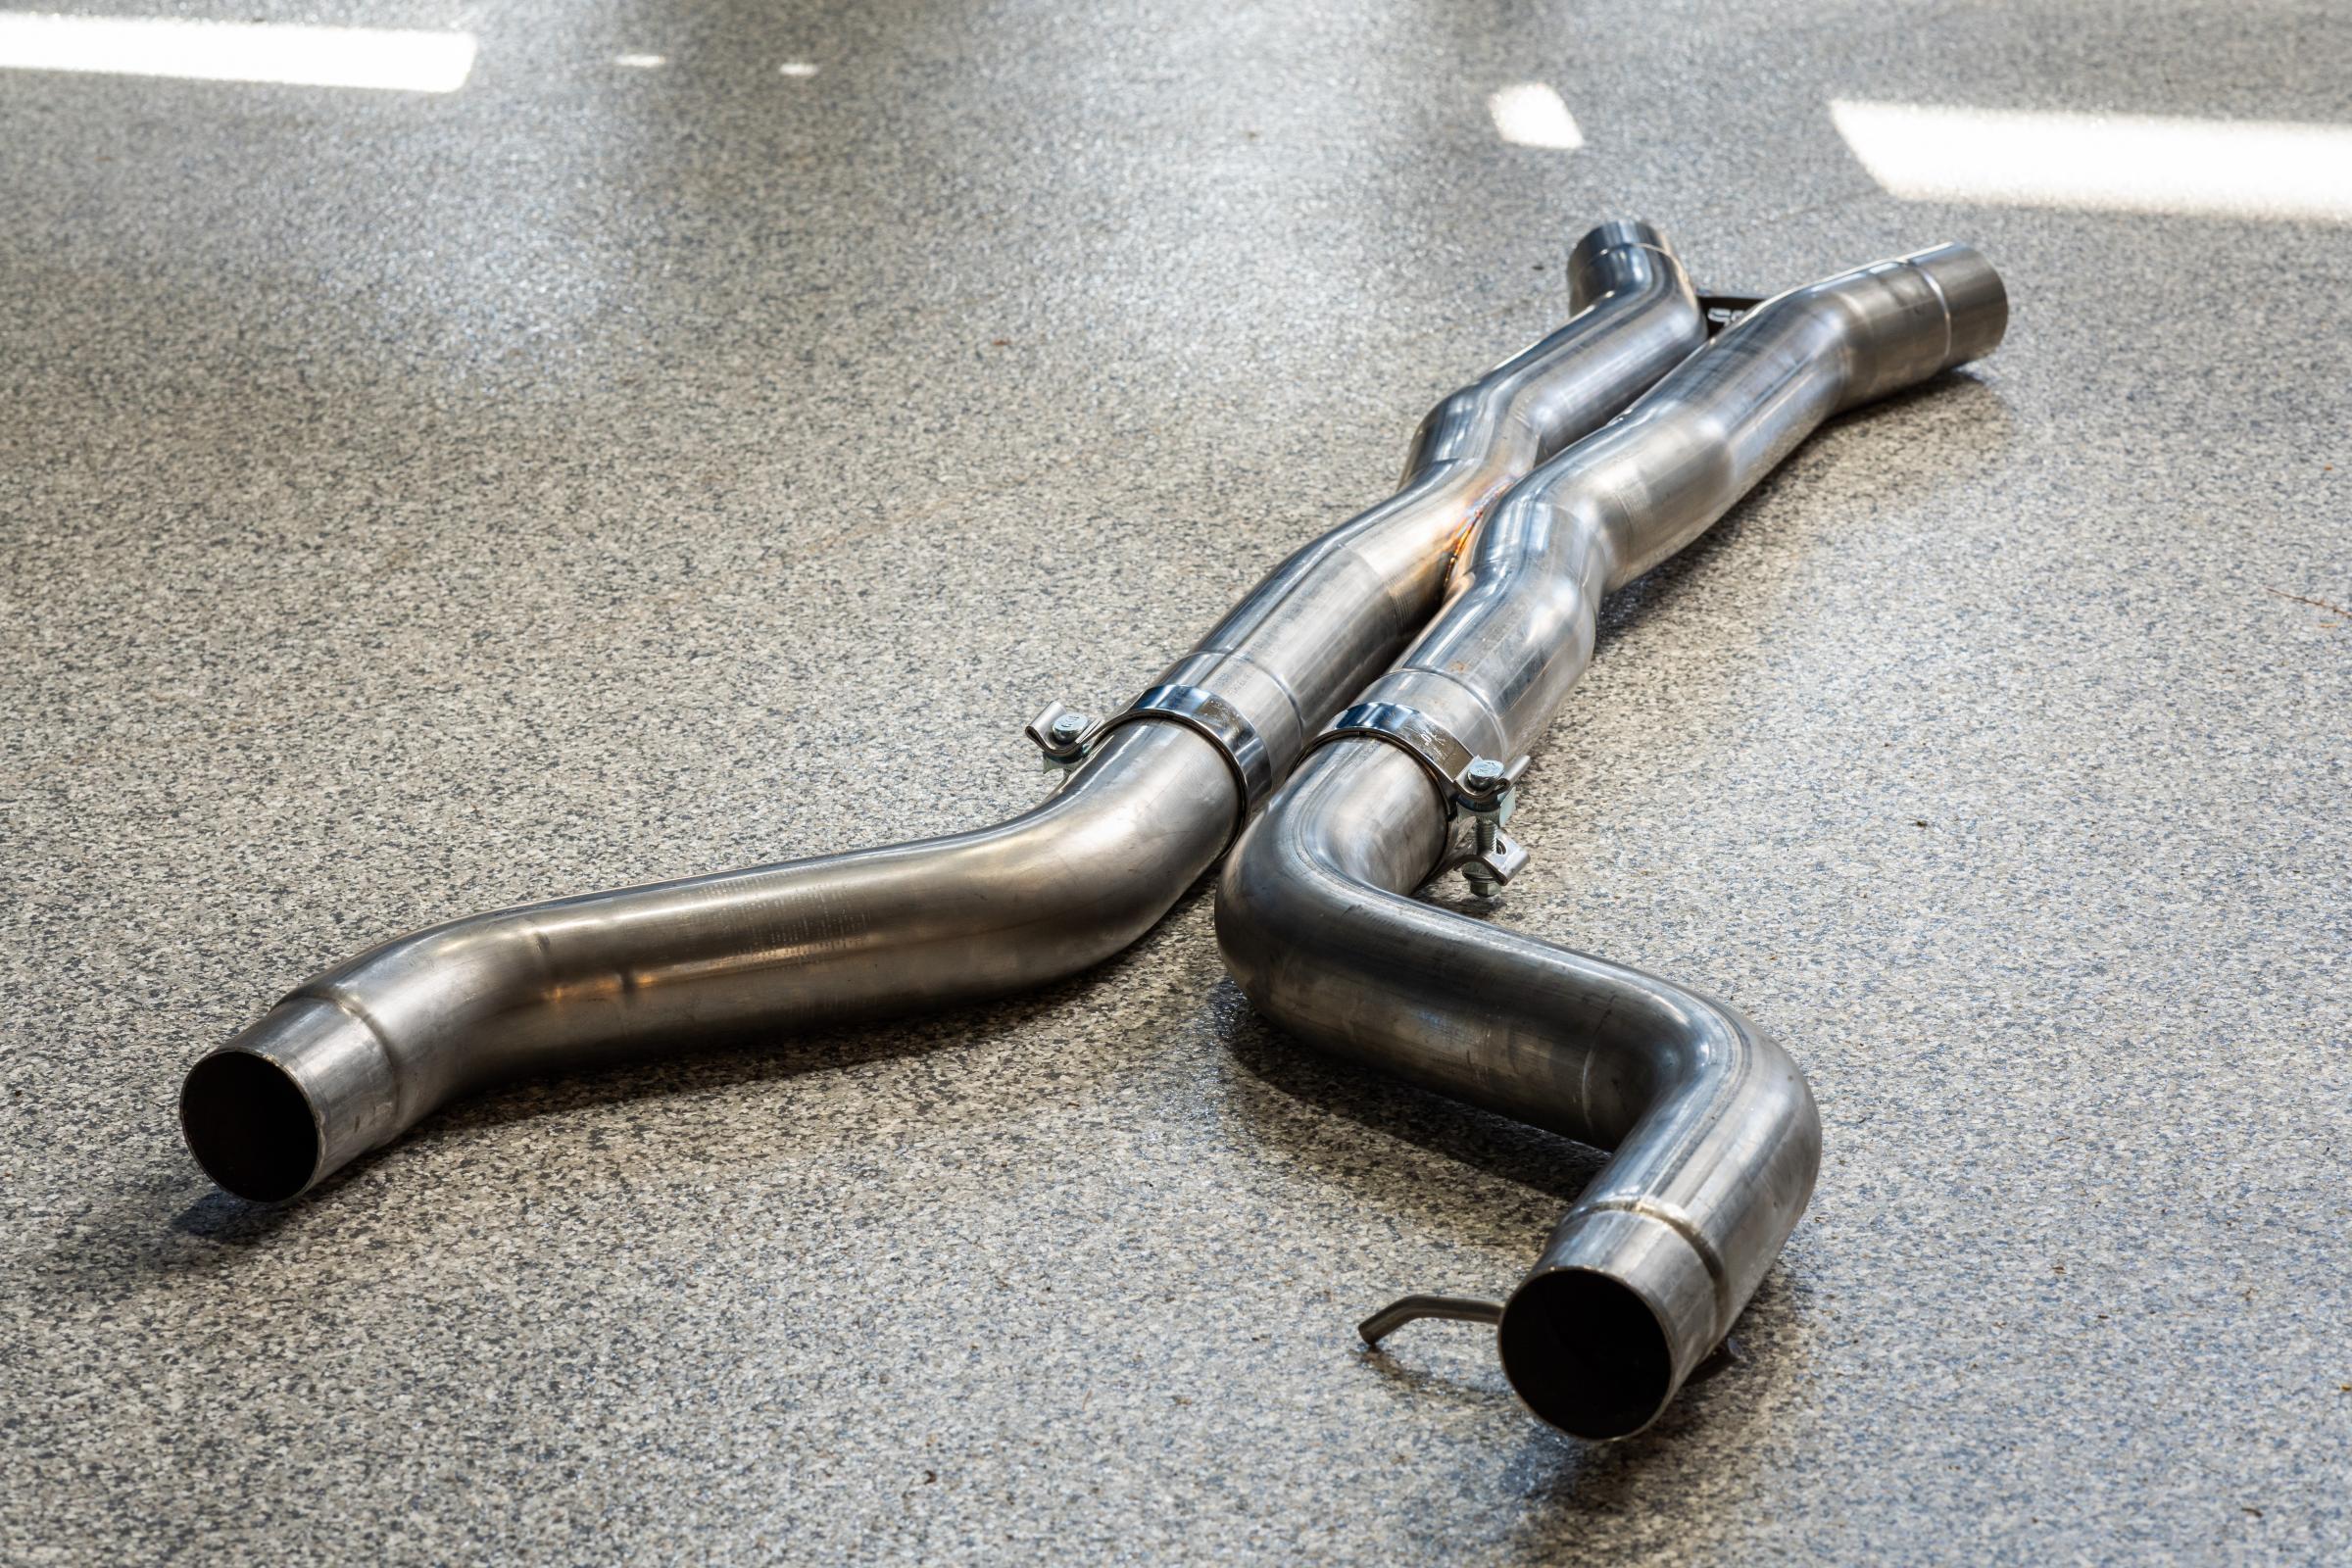 MBRP Exhaust 2021-2023 BMW M4 G82/ M3 G80 3.0L Coupe and Sedan T304 Stainless Steel 3 Inch Resonator Bypass X-Pipe MBRP S4501304